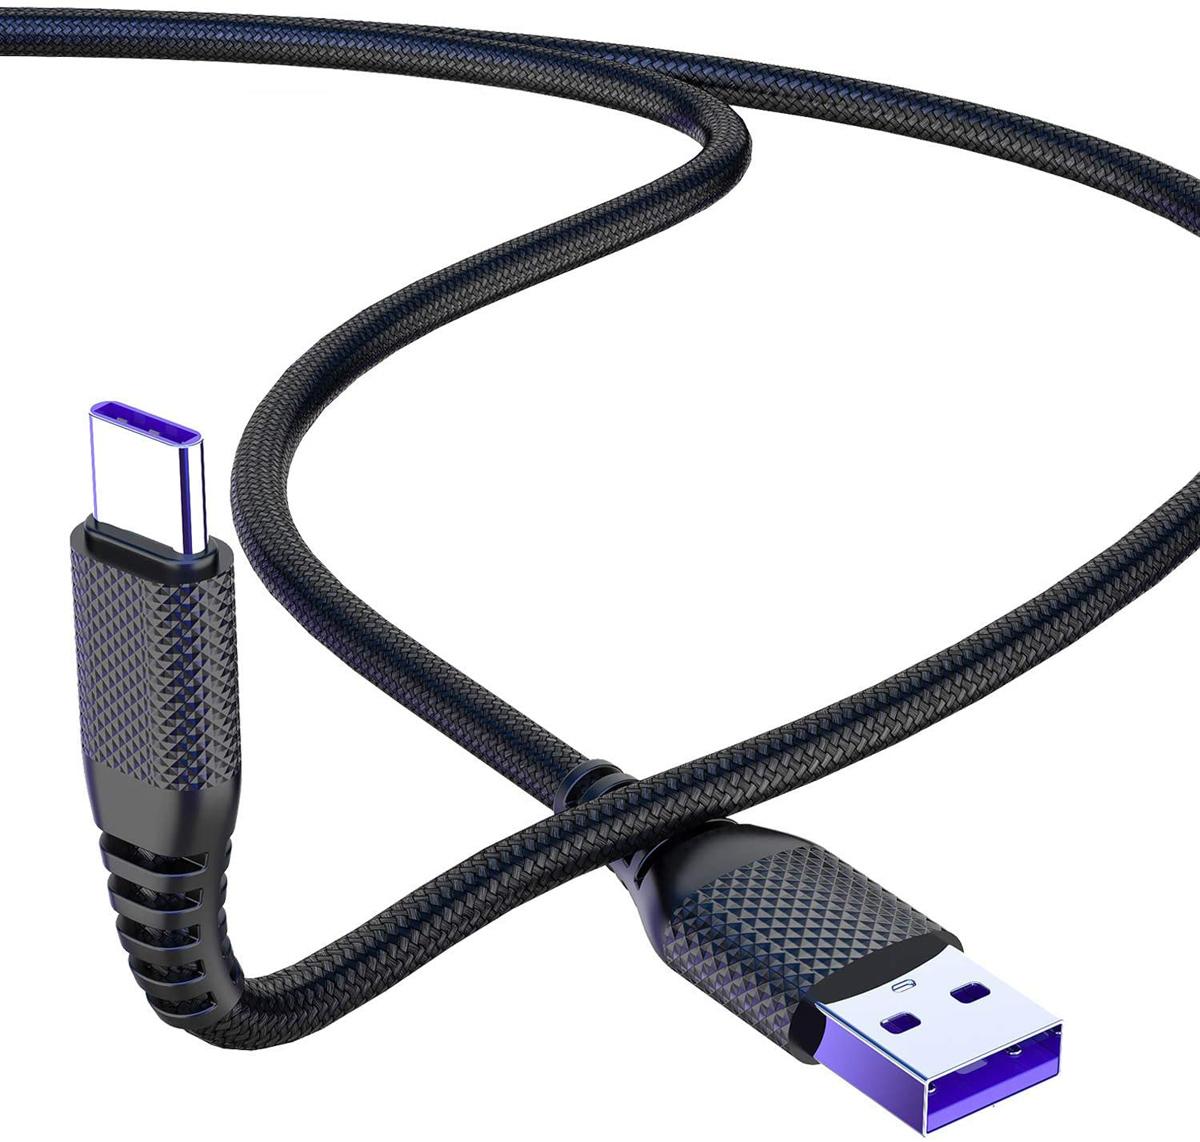 2 10ft Cabepow USB A to Type C Charging Cables for $3.99